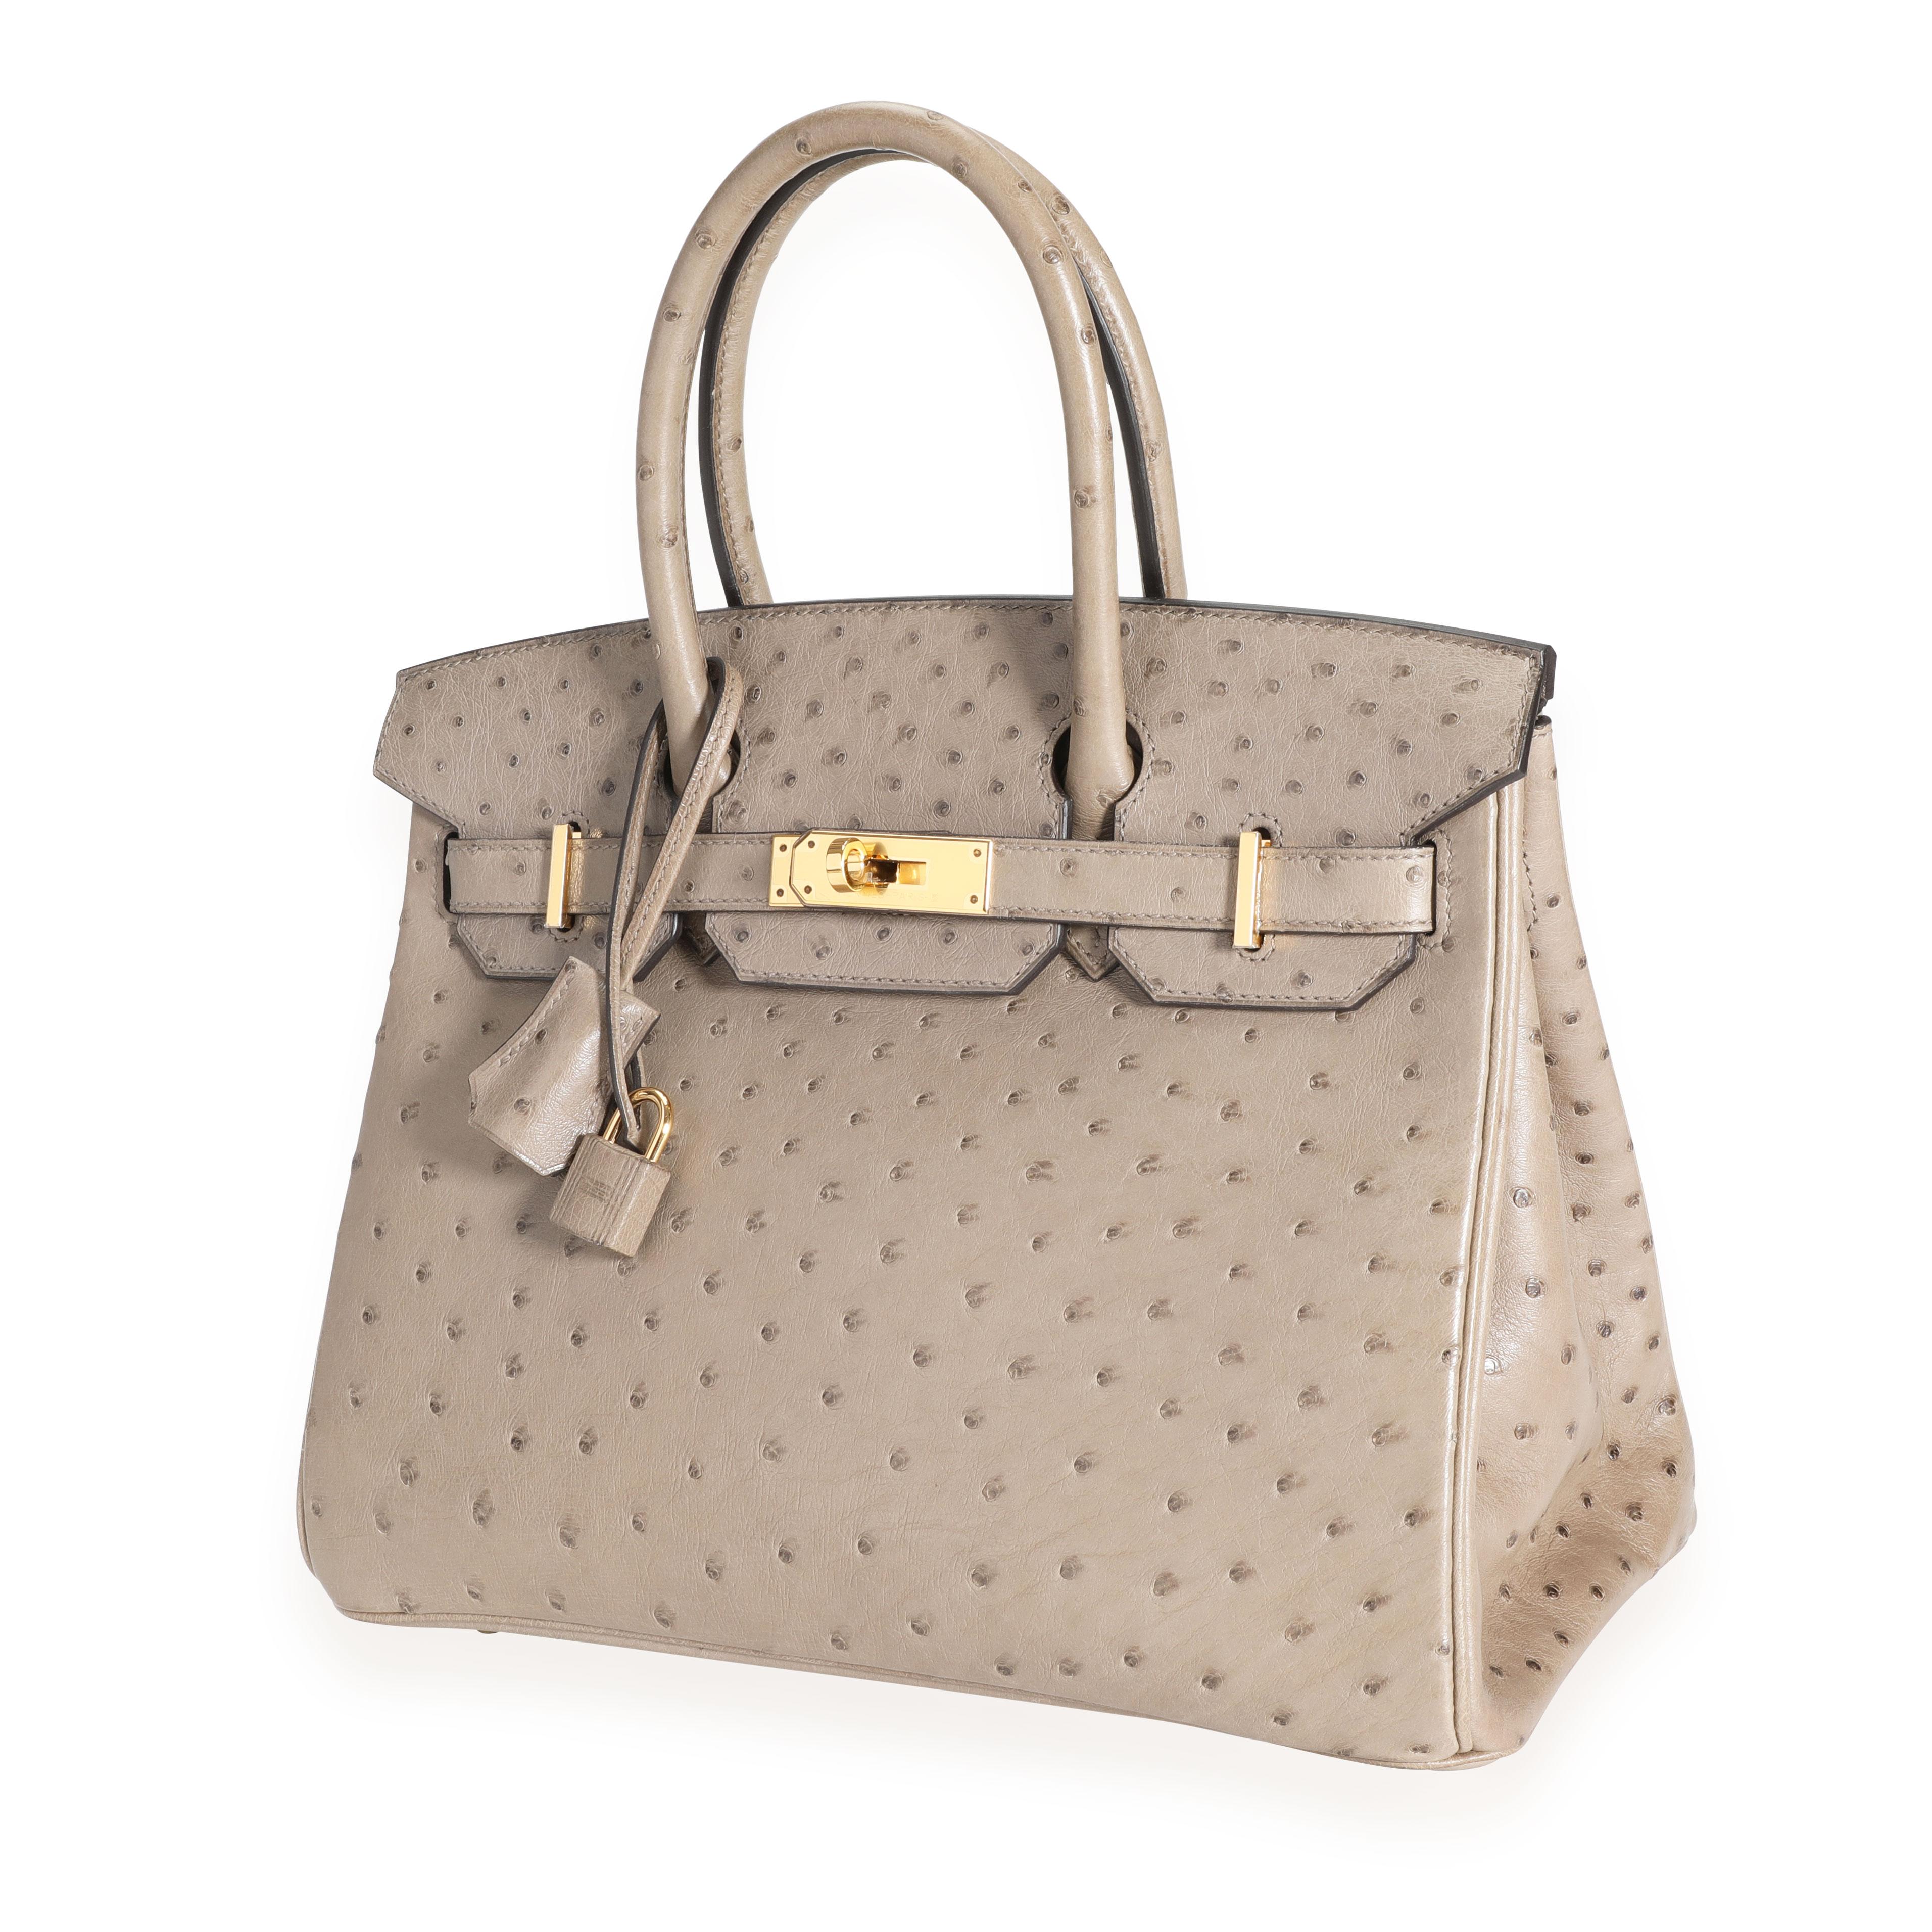 Hermès Gris Tourterelle Ostrich Birkin 30 GHW
SKU: 111416
MSRP:  
Condition: Pre-owned (3000)
Condition Description: 
Handbag Condition: Very Good
Condition Comments: Very Good Condition. Plastic on hardware. Darkening to corners. Faint scuffs to